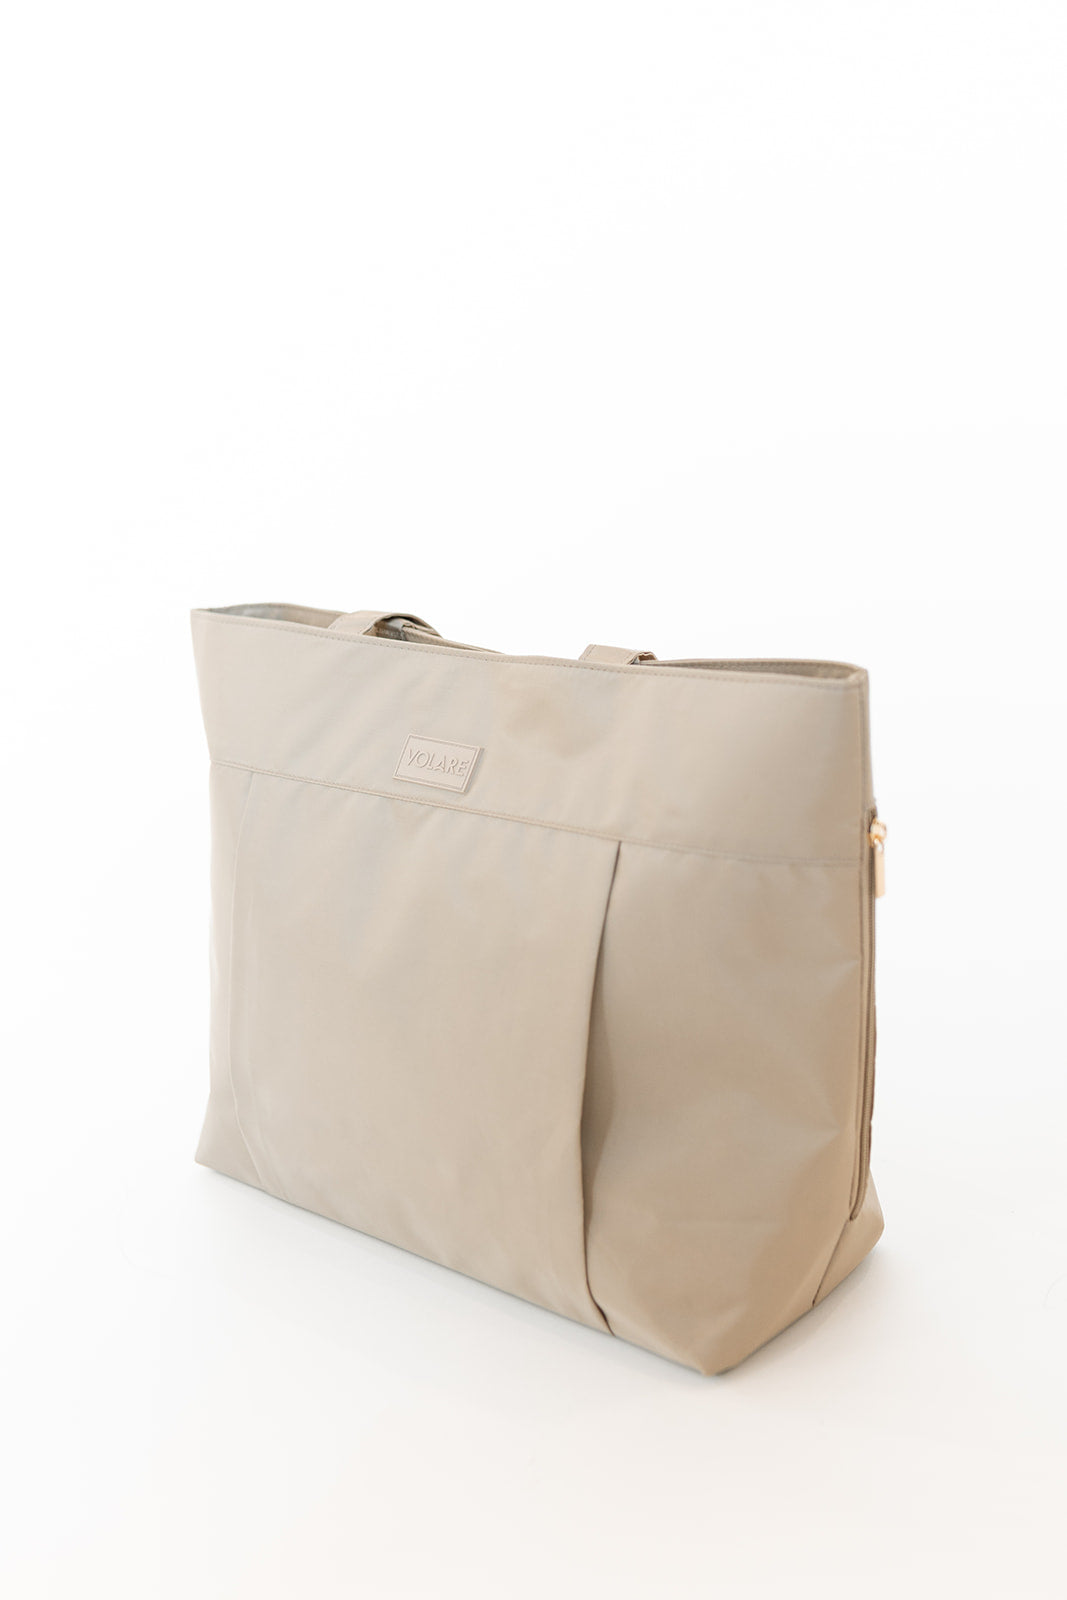 Day to Day Tote Bag